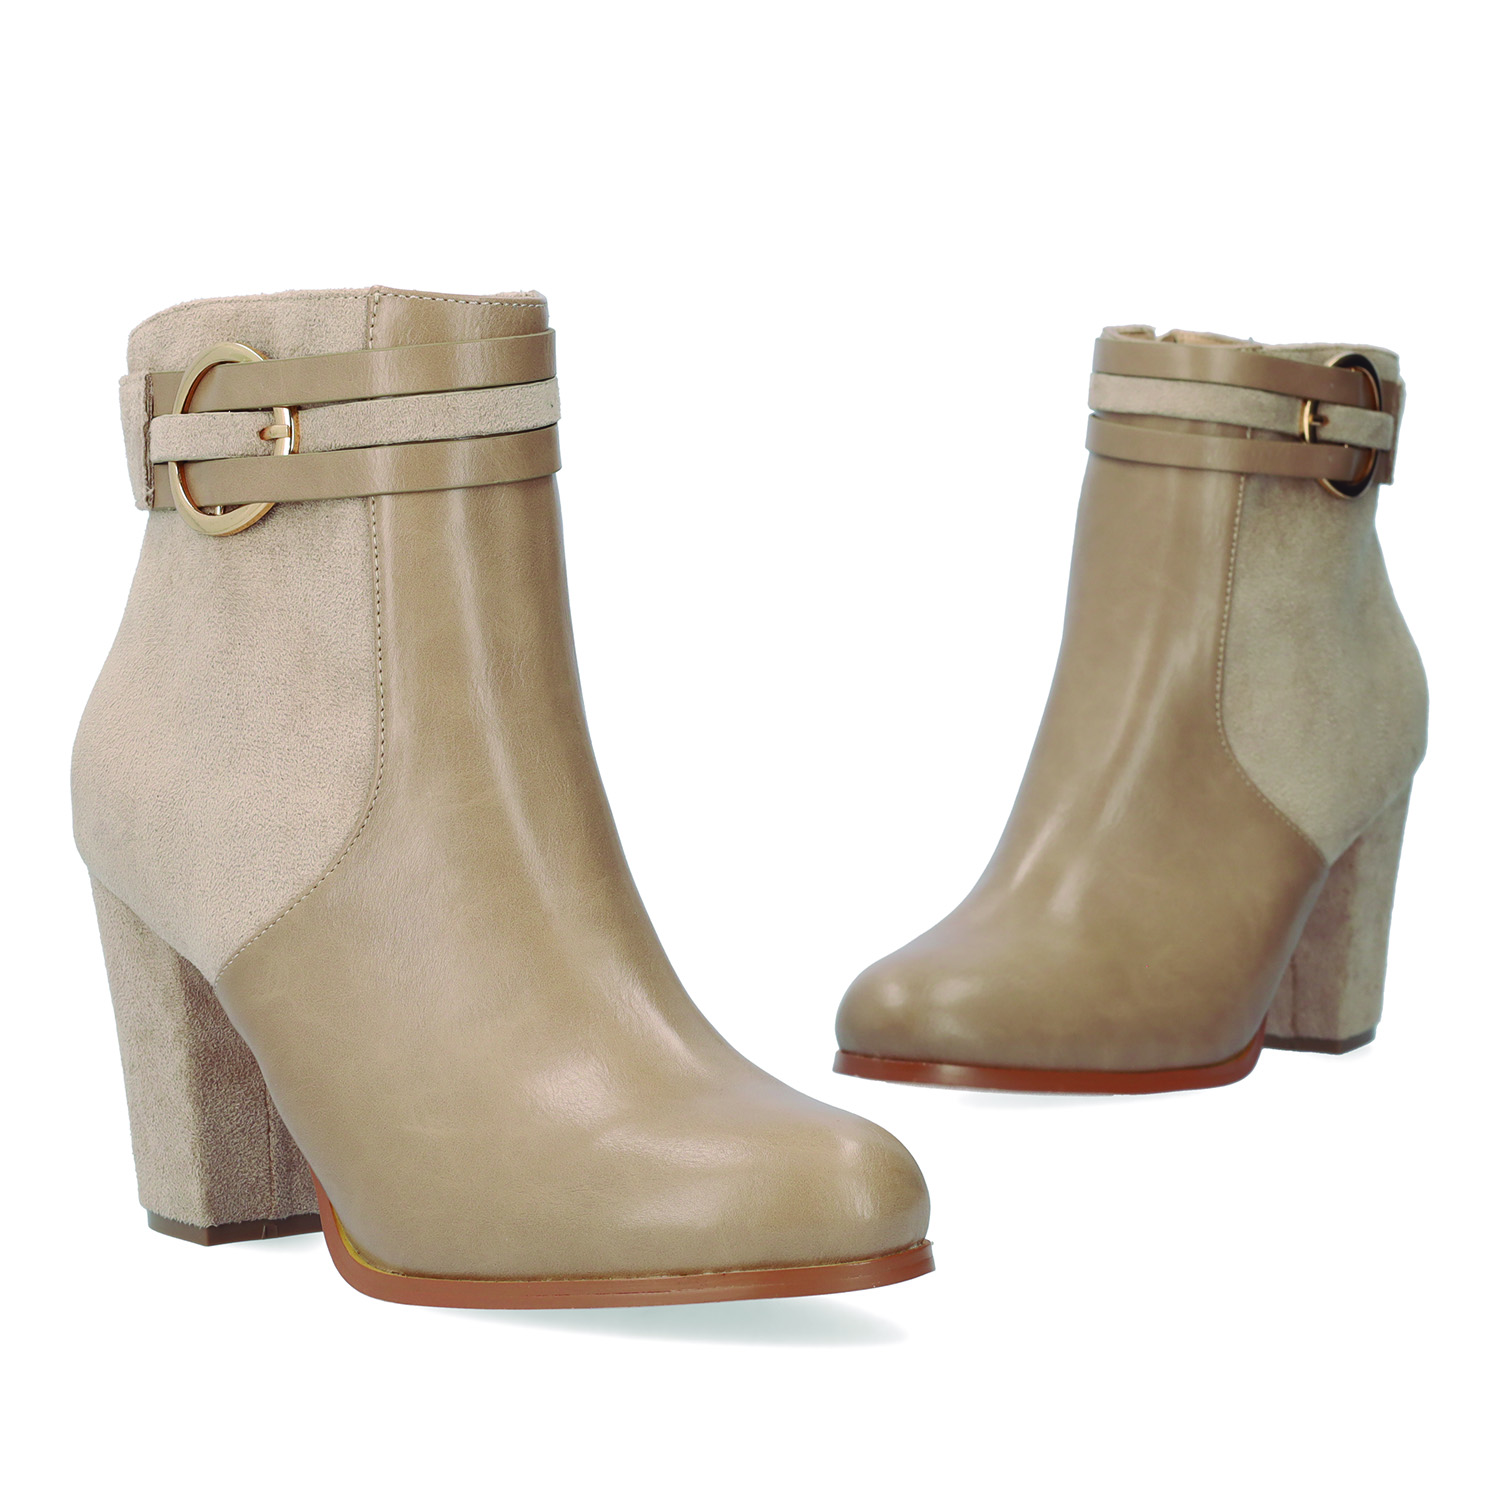 High heeled combined beige colour bootie. 